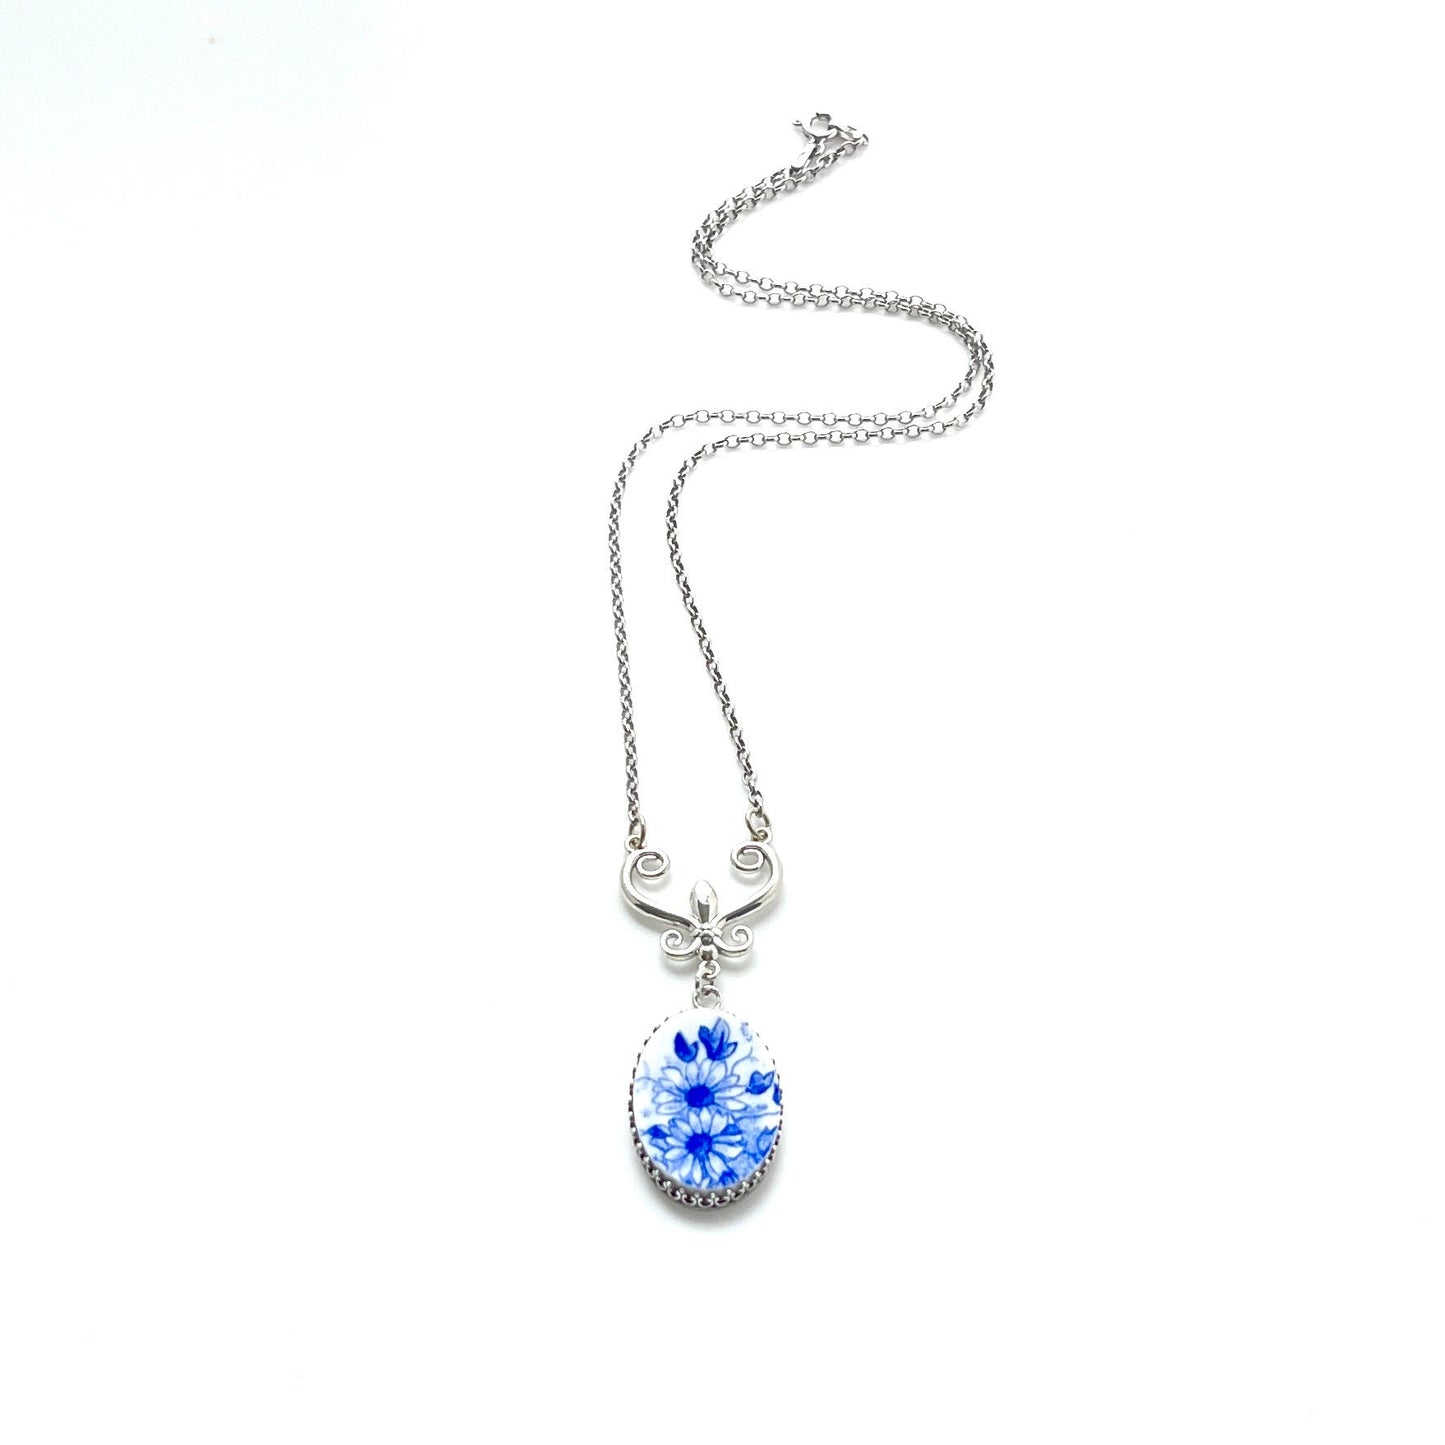 20th Anniversary Gift for Wife, Unique Gifts for Women, Broken China Jewelry Daisy Necklace, Shelley China Dainty Blue